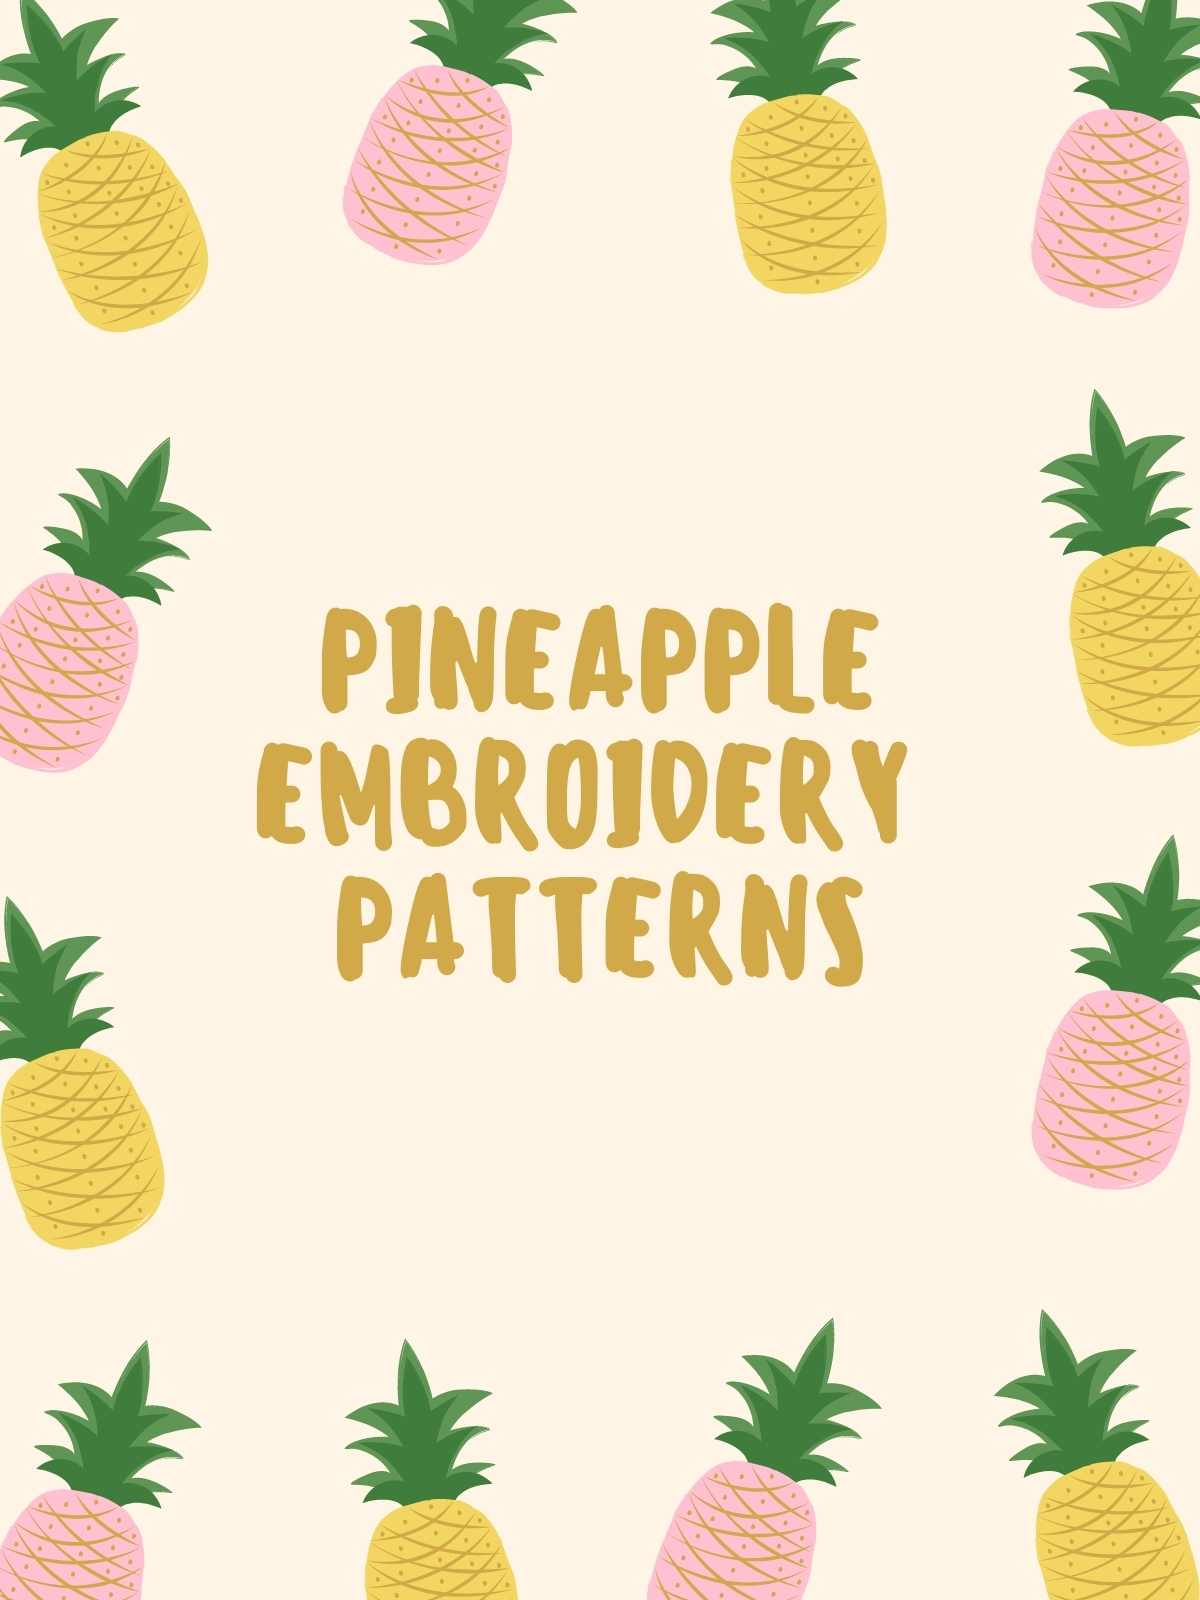 Pineapple embroidery patterns